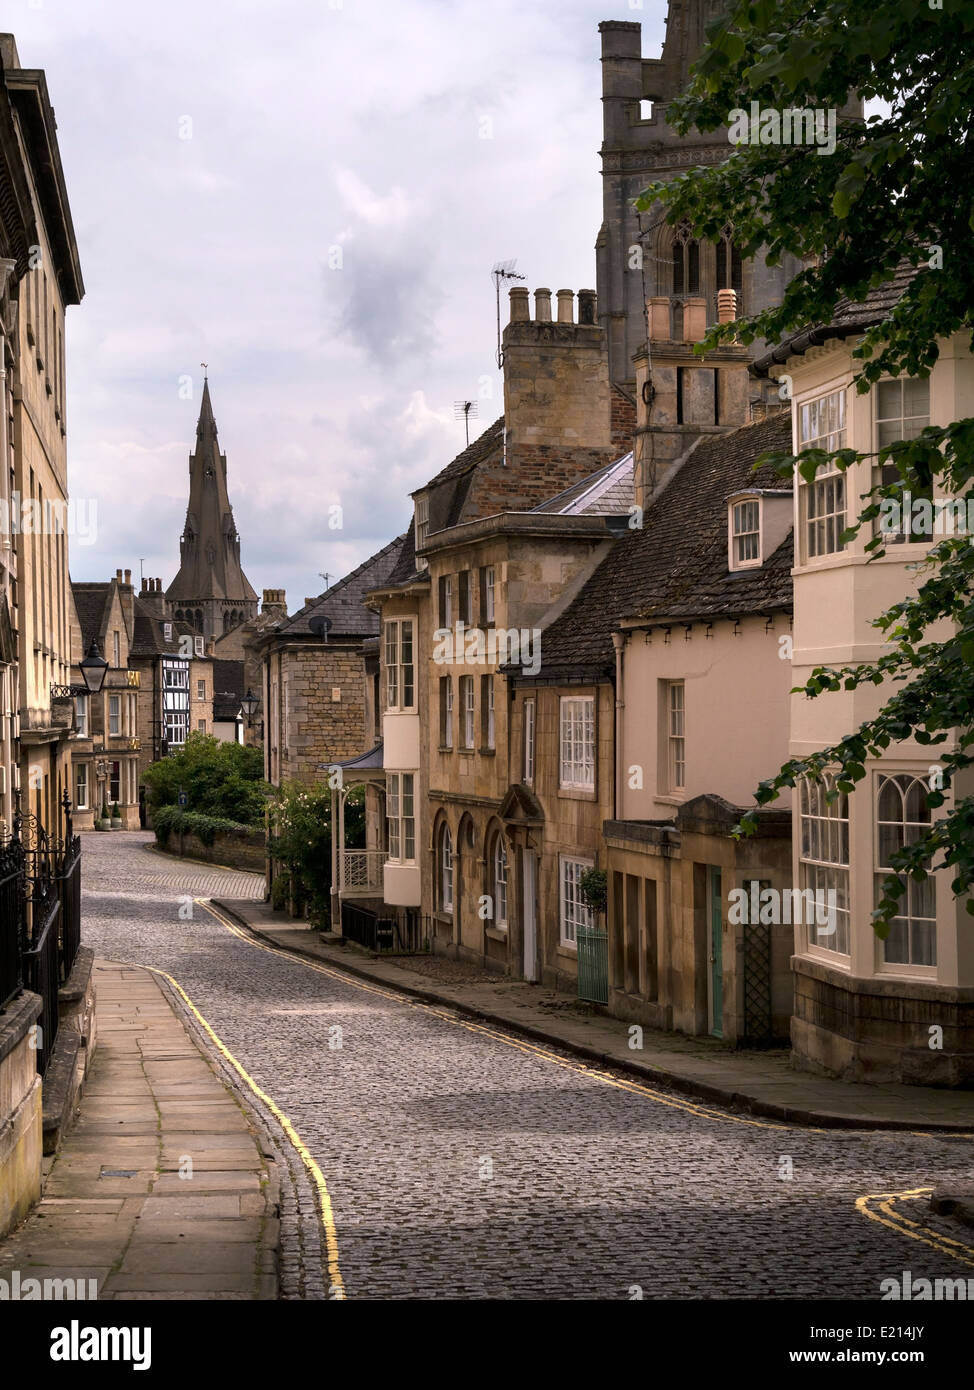 Old narrow cobbled street with stone houses, Barn Hill and All Saints Place, Stamford, Lincolnshire, England, UK Stock Photo